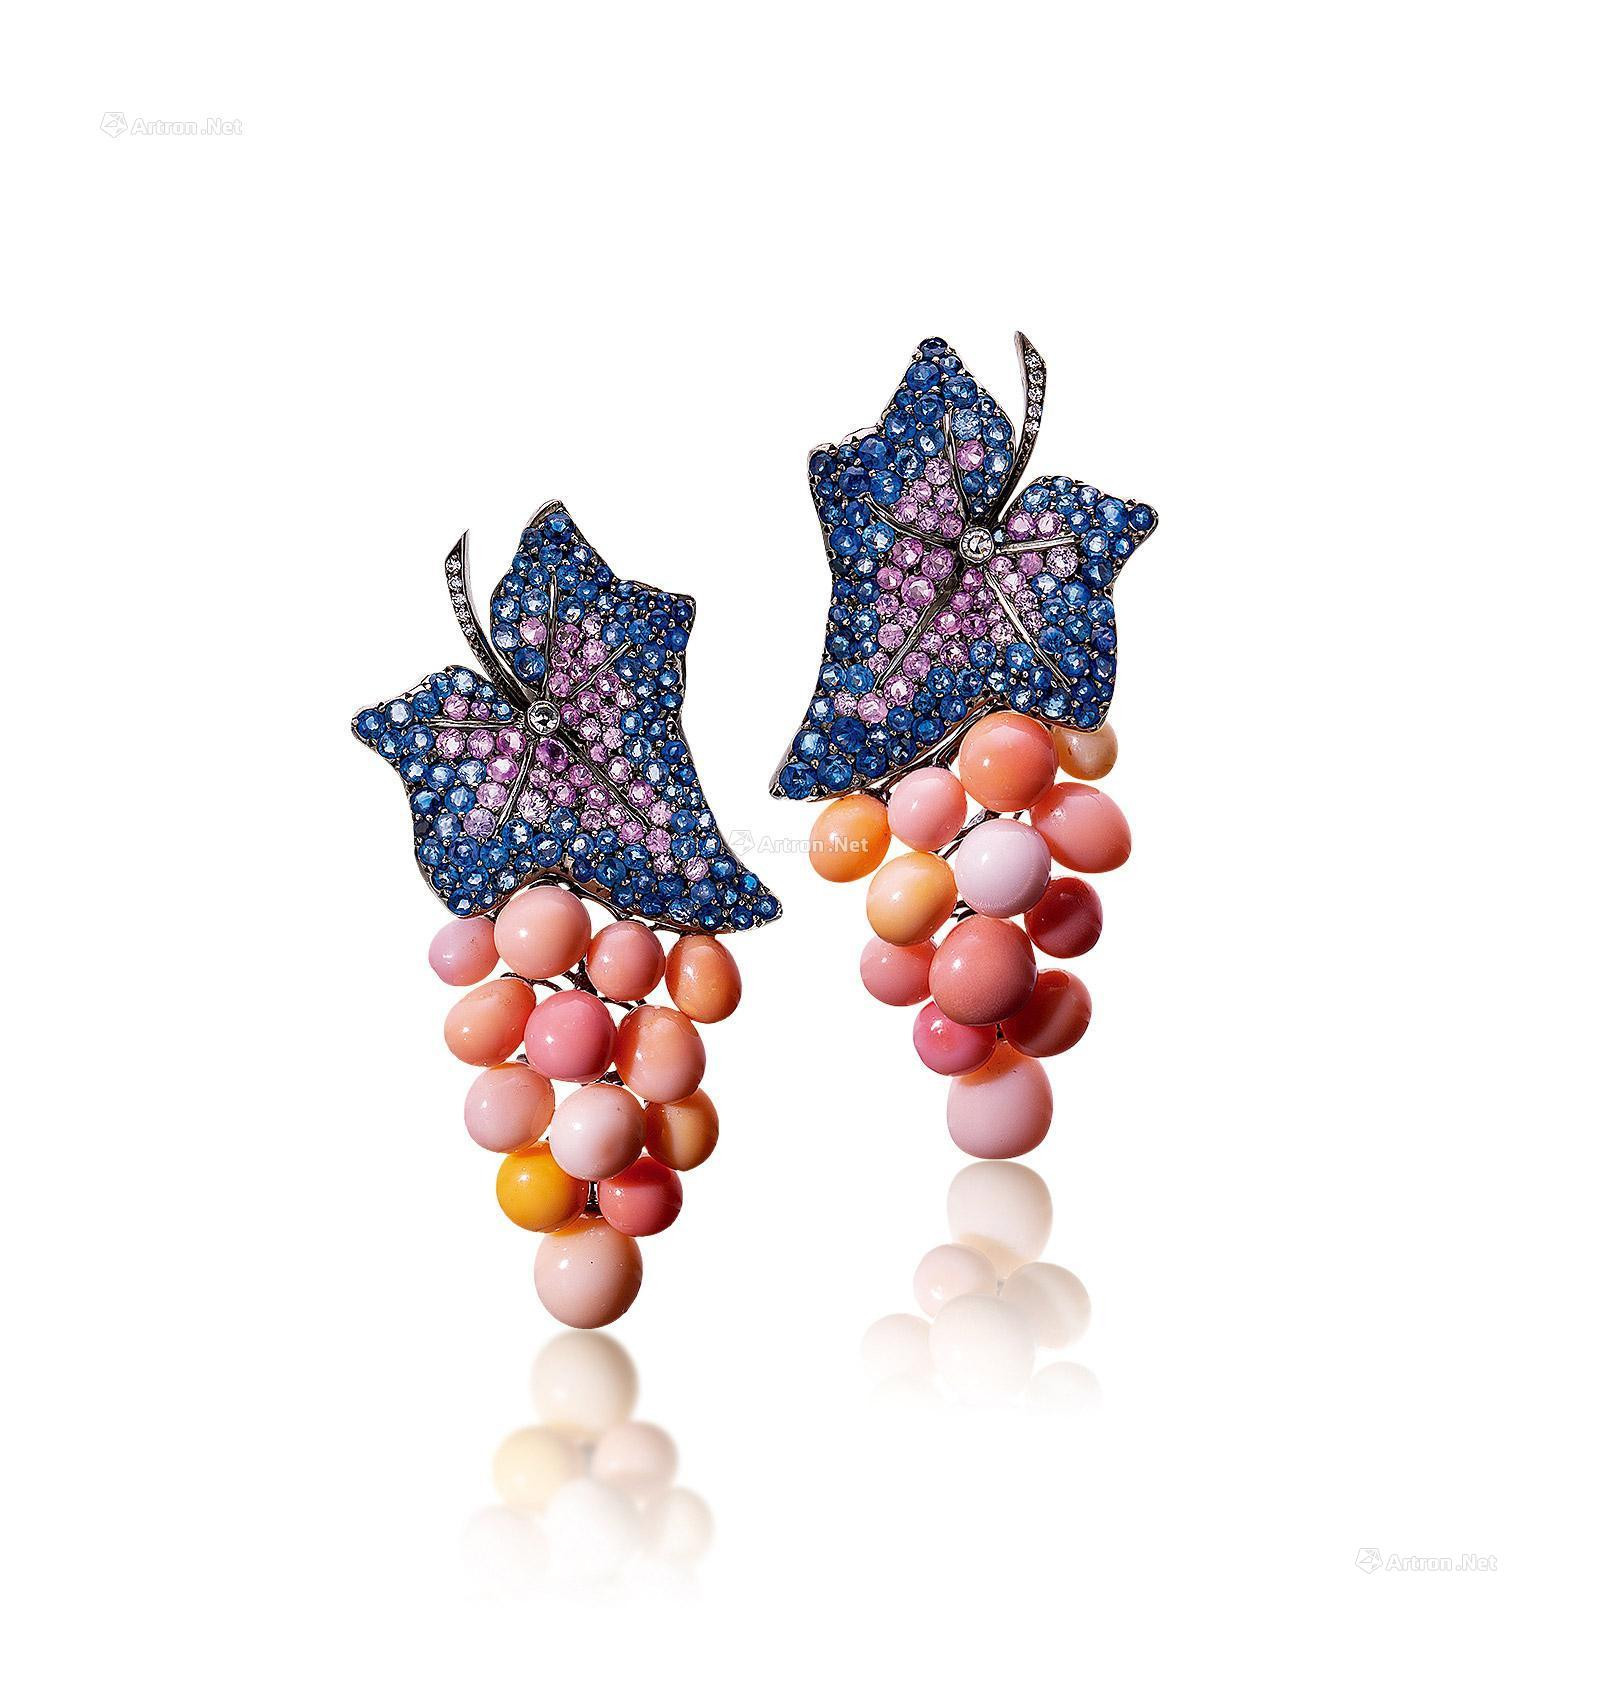 A PAIR OF CONCH PEARL AND MULTI-COLORED SAPPHIRE EARRINGS